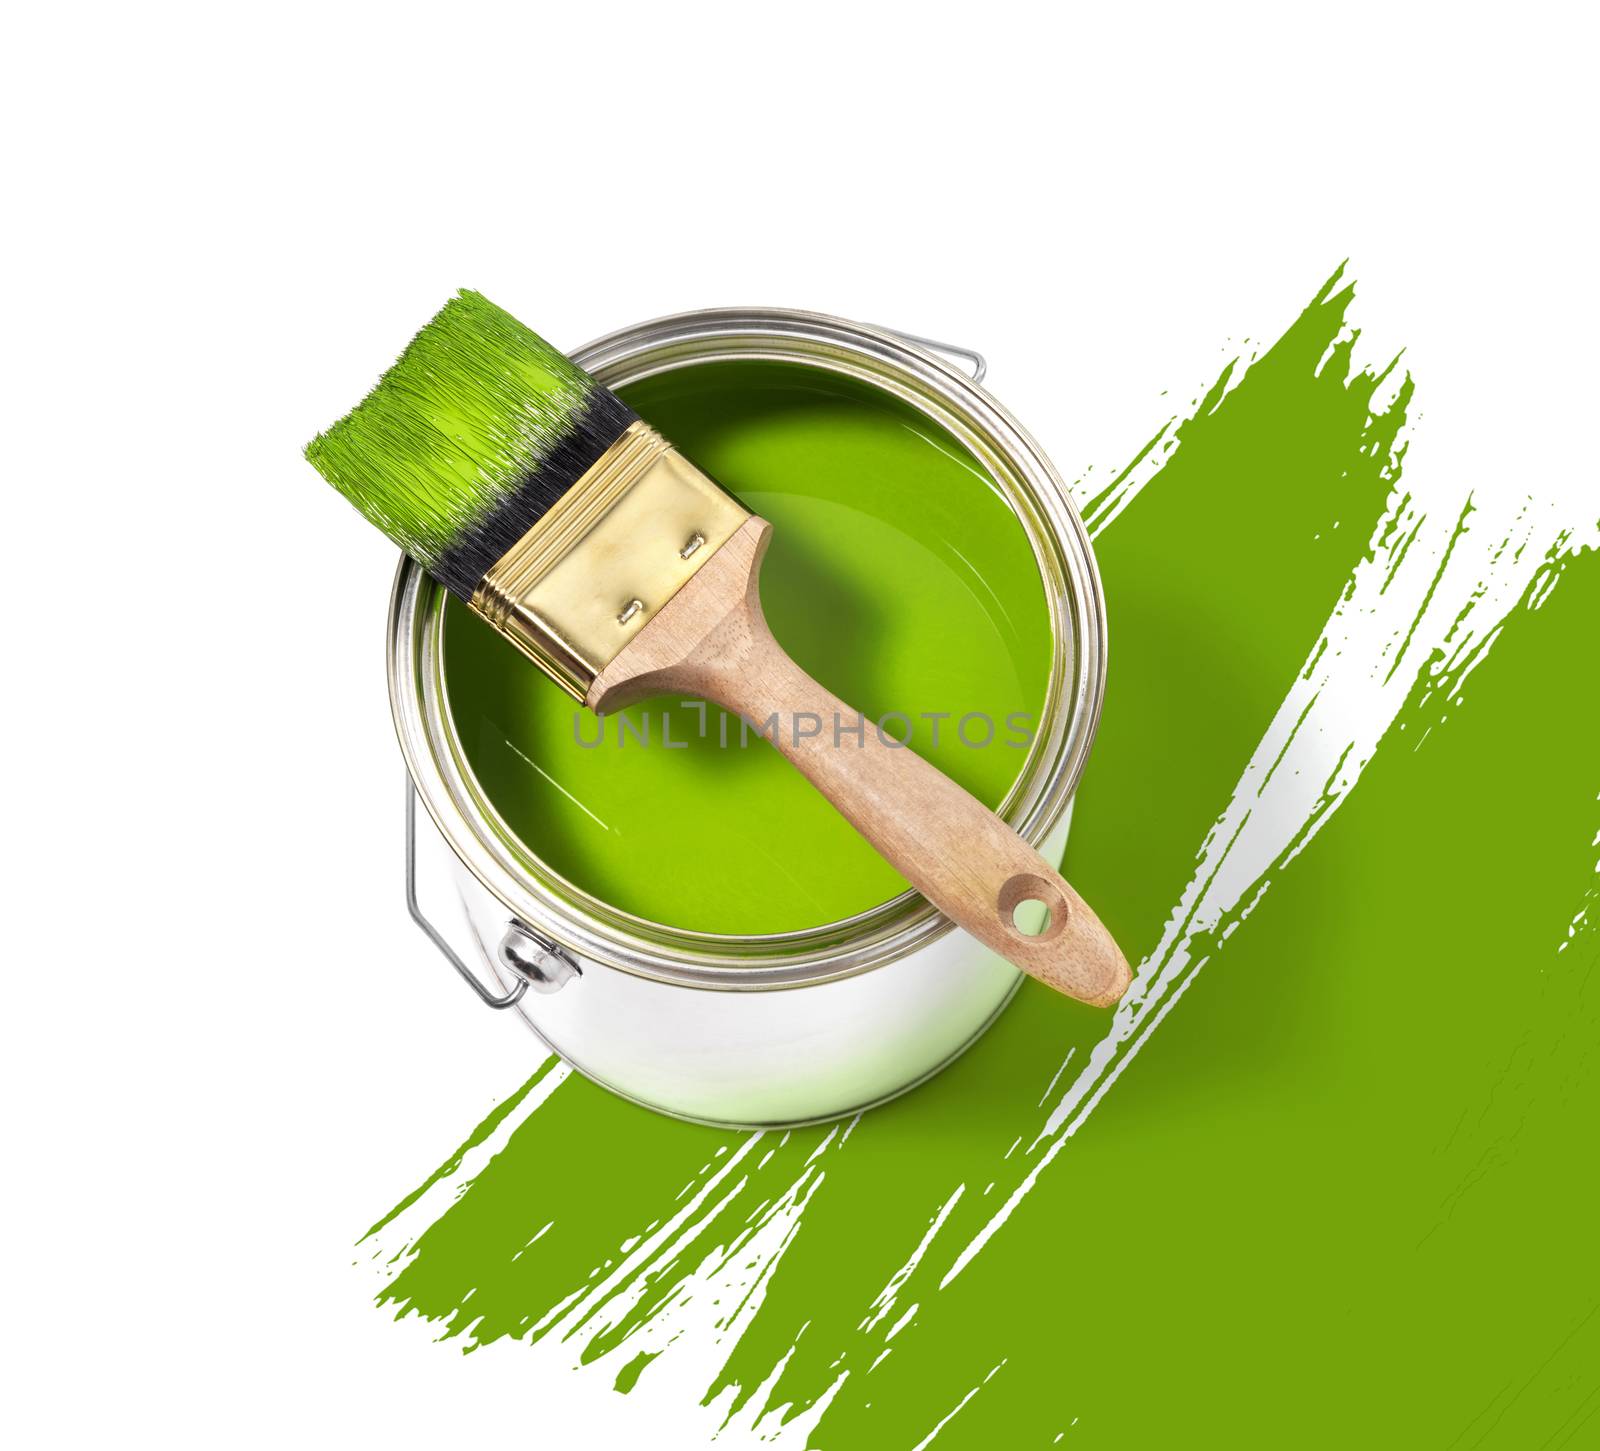 Green paint tin can with brush on top on a white background with by janssenkruseproductions